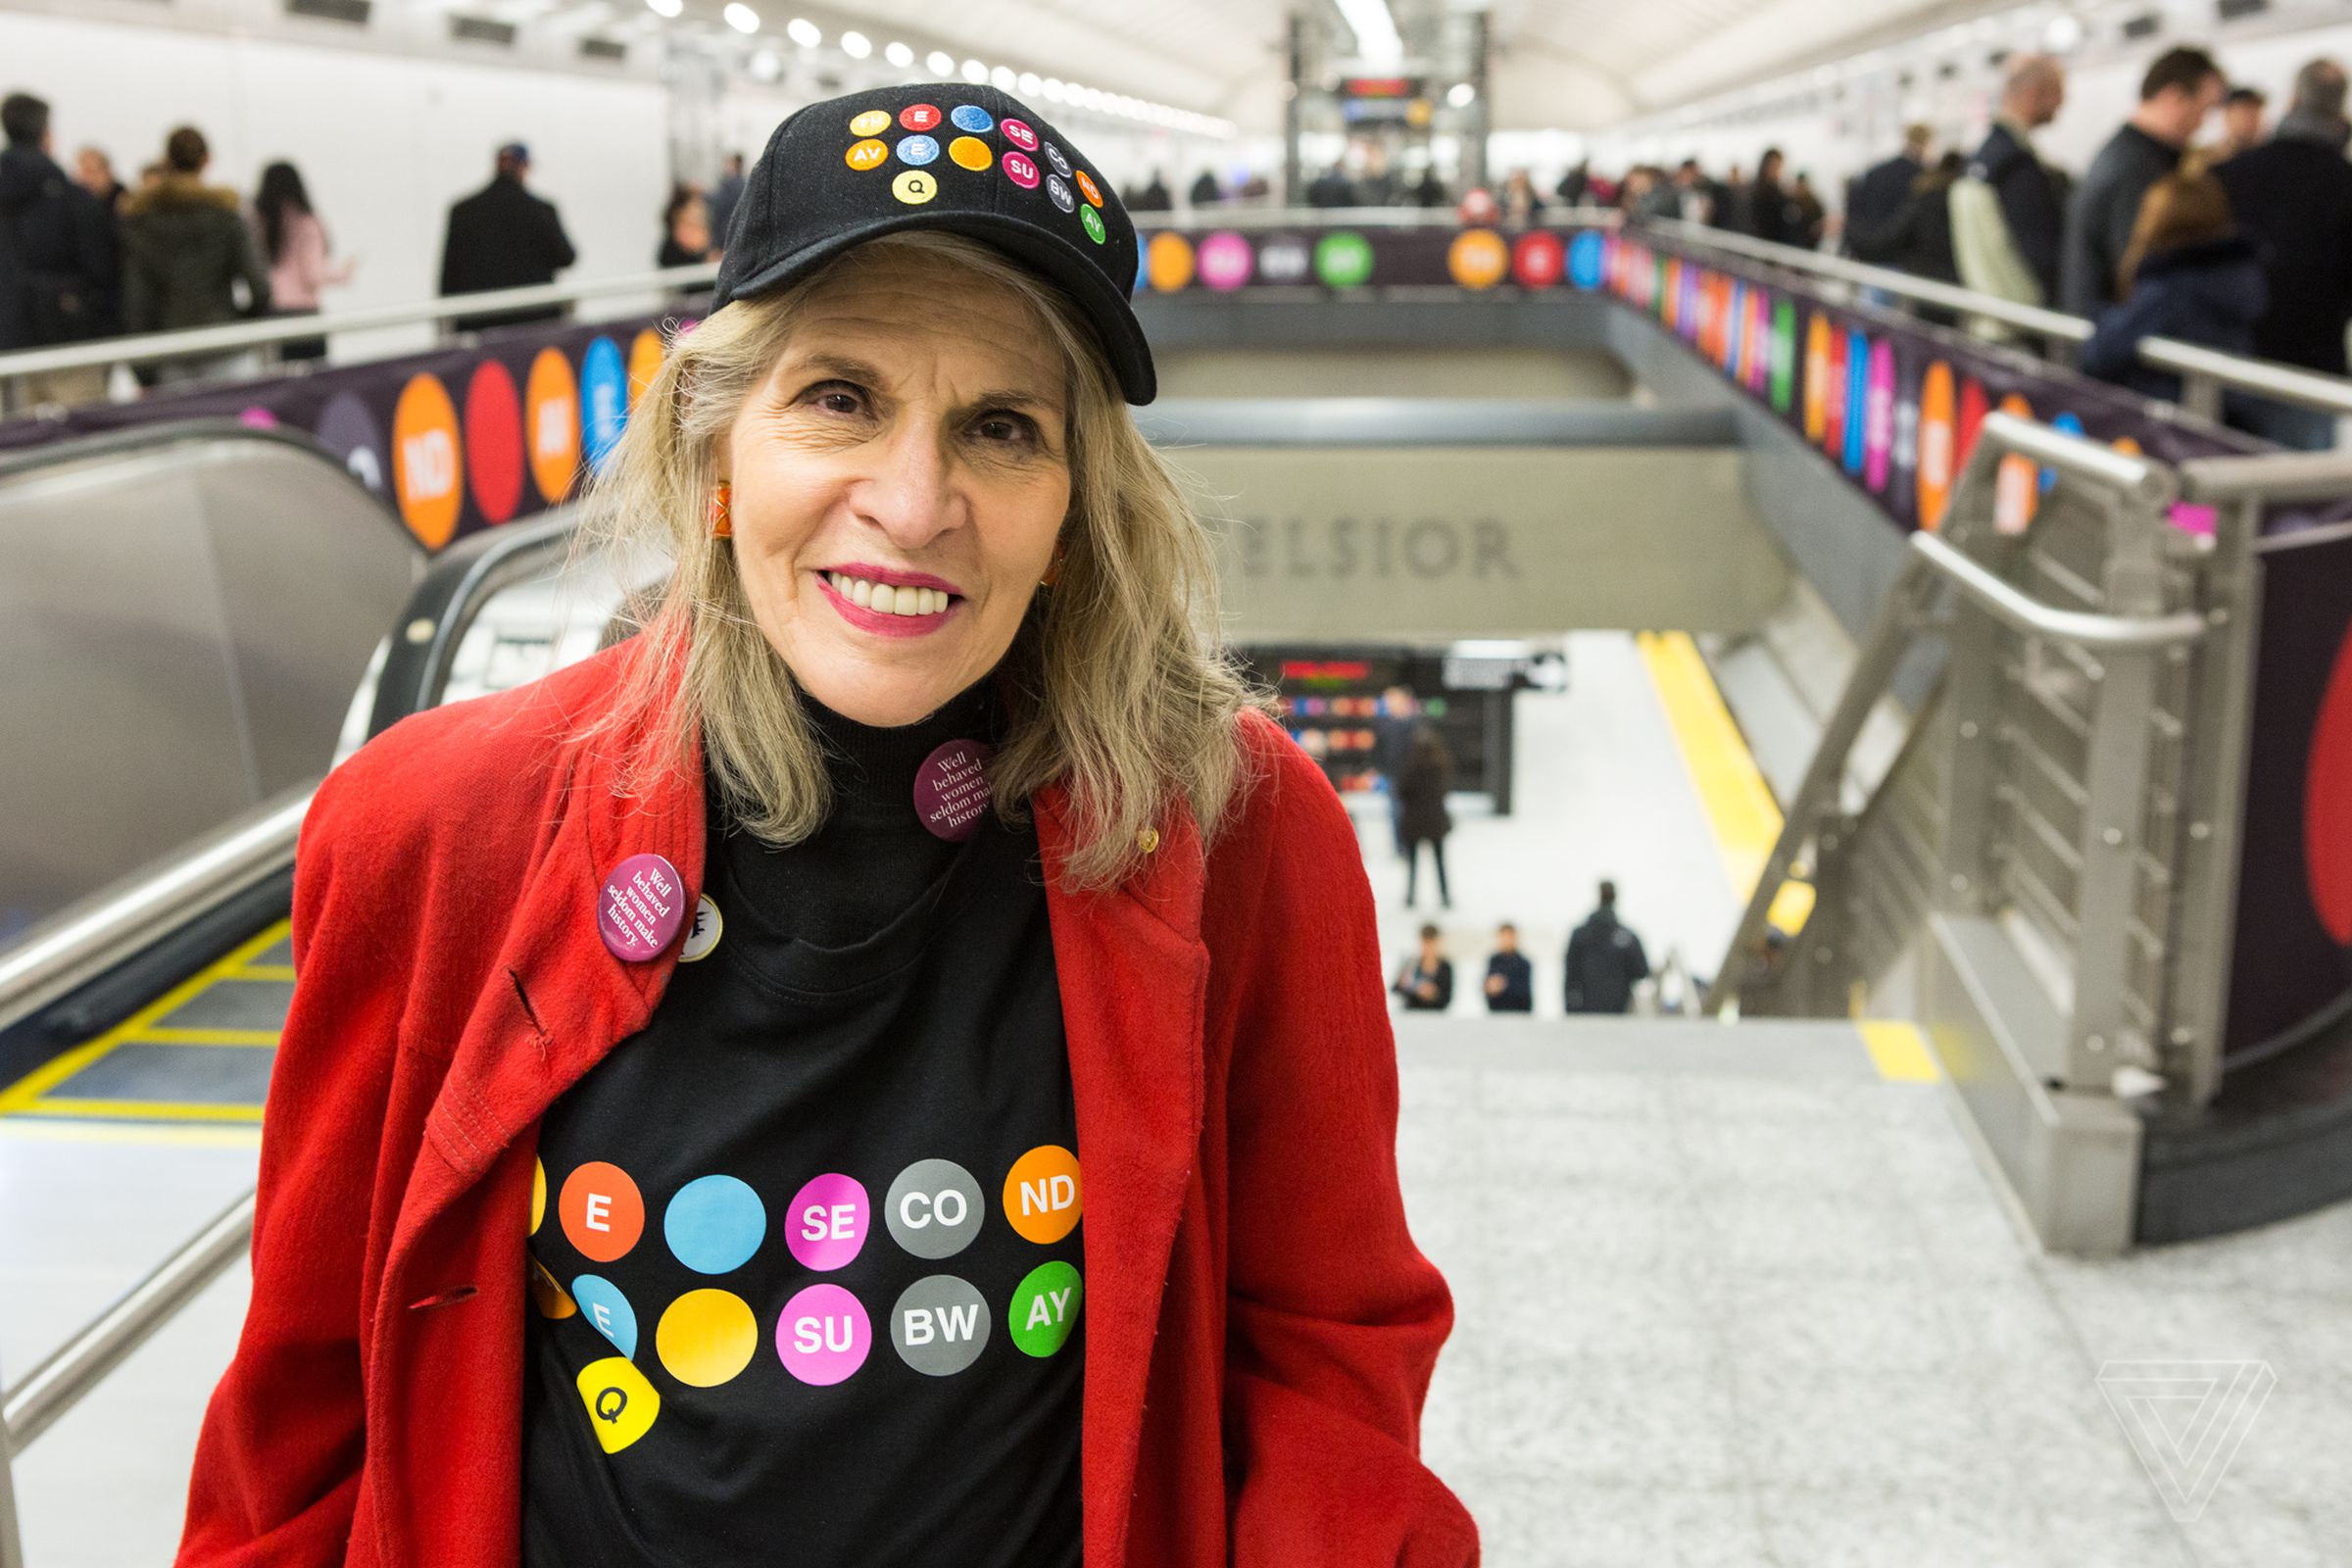 Trudy Mason, a member of the New York City Transit Riders Council at the 86th Street and Second Avenue Q train station, which had open to riders just an hour earlier.